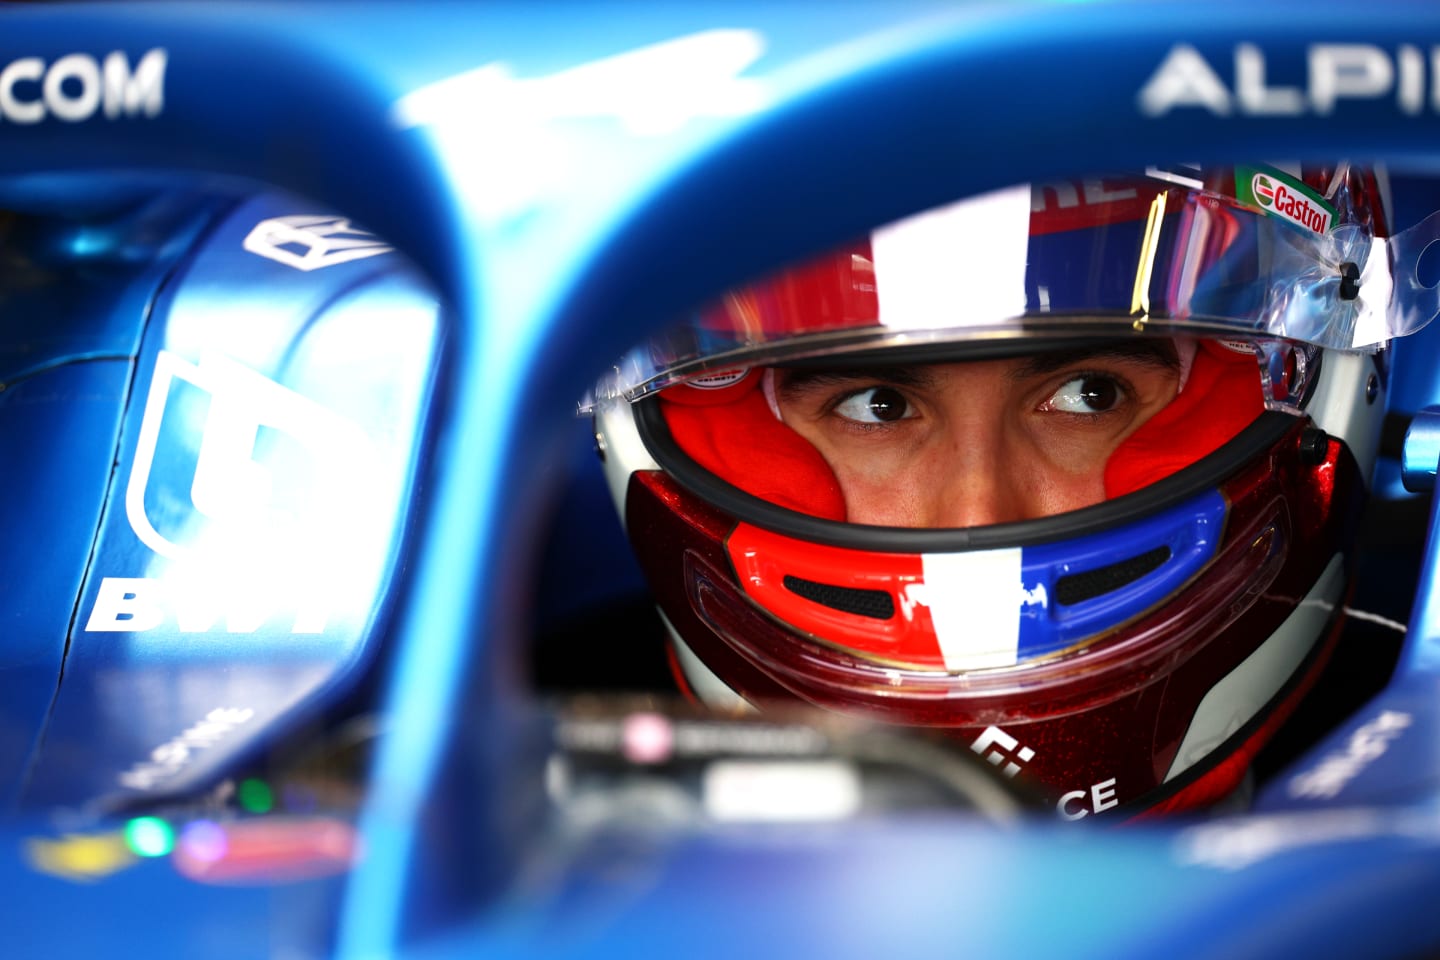 NORTHAMPTON, ENGLAND - JULY 01: Esteban Ocon of France driving the (31) Alpine F1 A522 Renault looks on in the garage during practice ahead of the F1 Grand Prix of Great Britain at Silverstone on July 01, 2022 in Northampton, England. (Photo by Clive Rose/Getty Images)